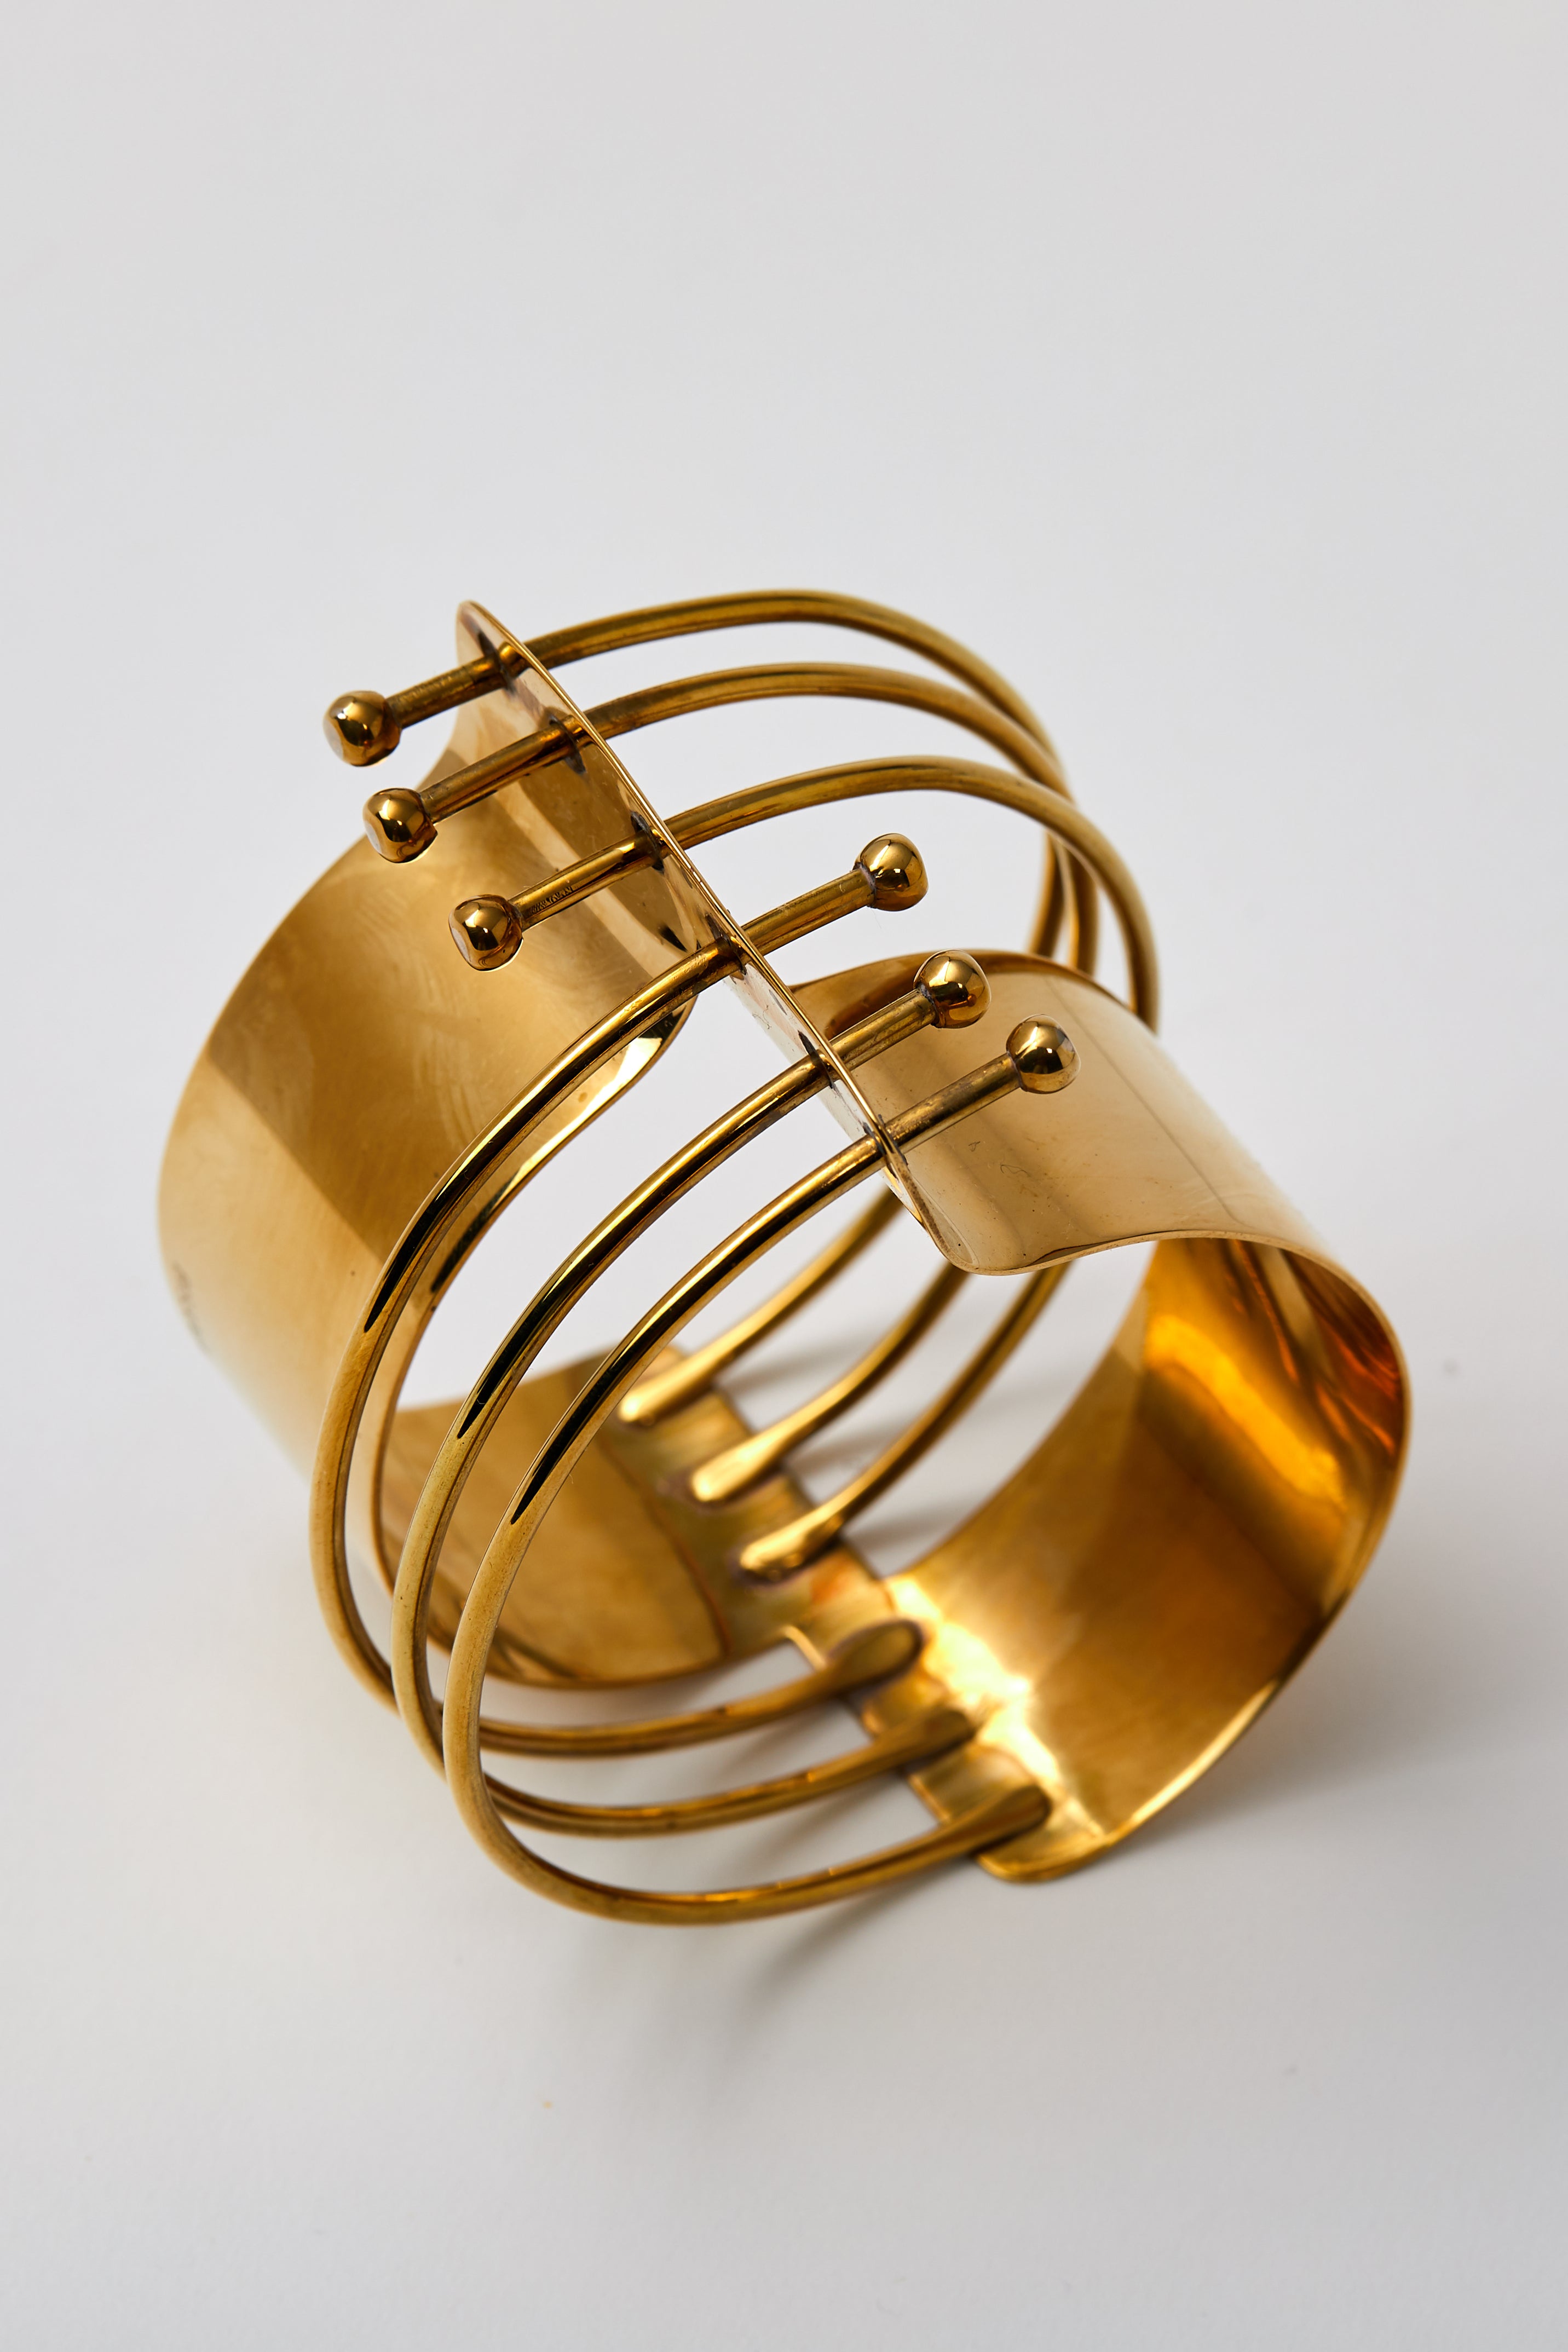 Serpent Arm Cuff - Ethically Made Jewelry by Catori Life | Catori Life